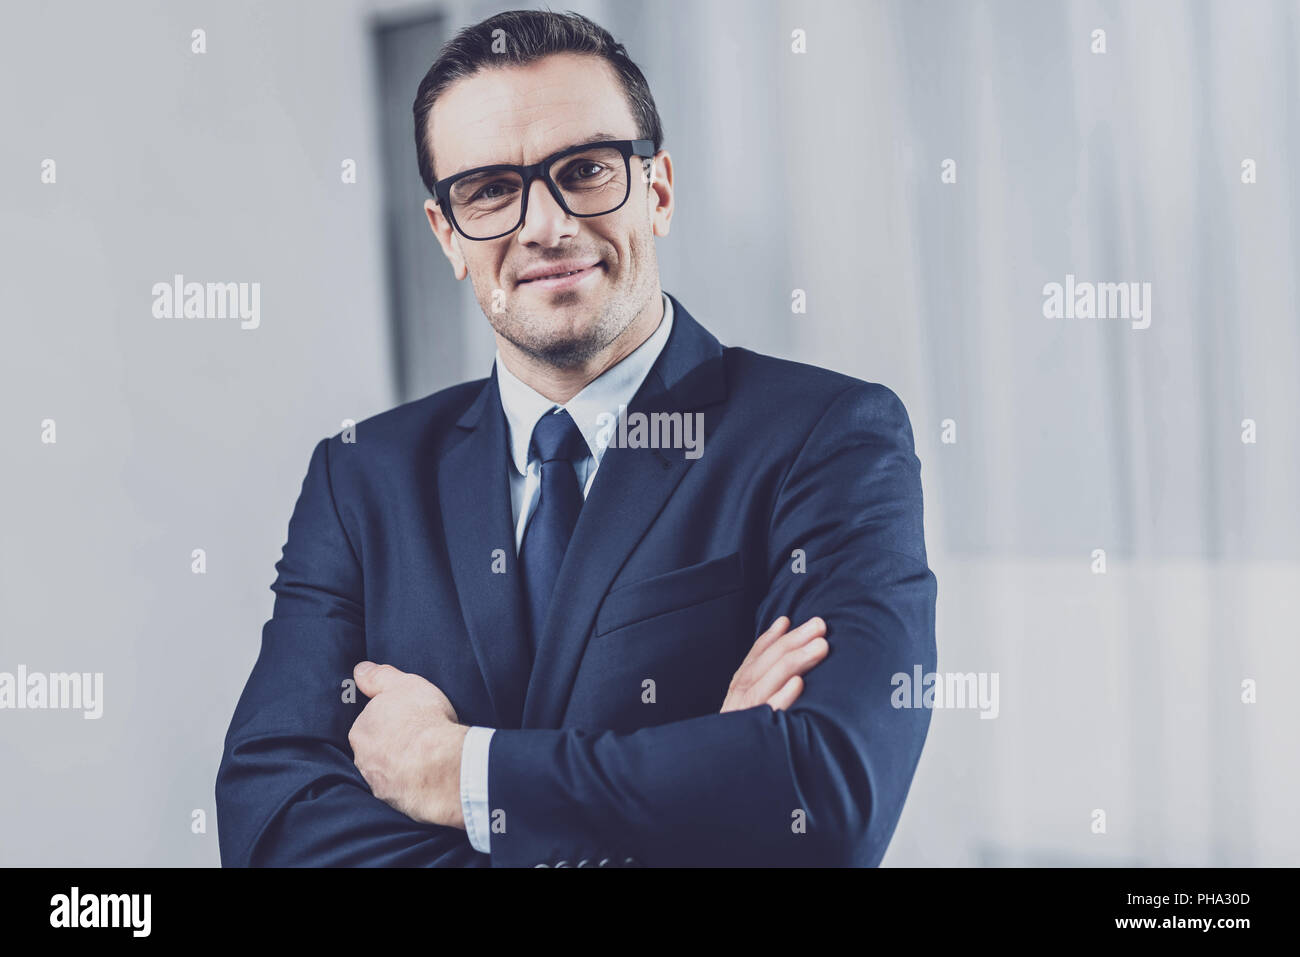 Ambitious businessman folding his arms on his chest Stock Photo